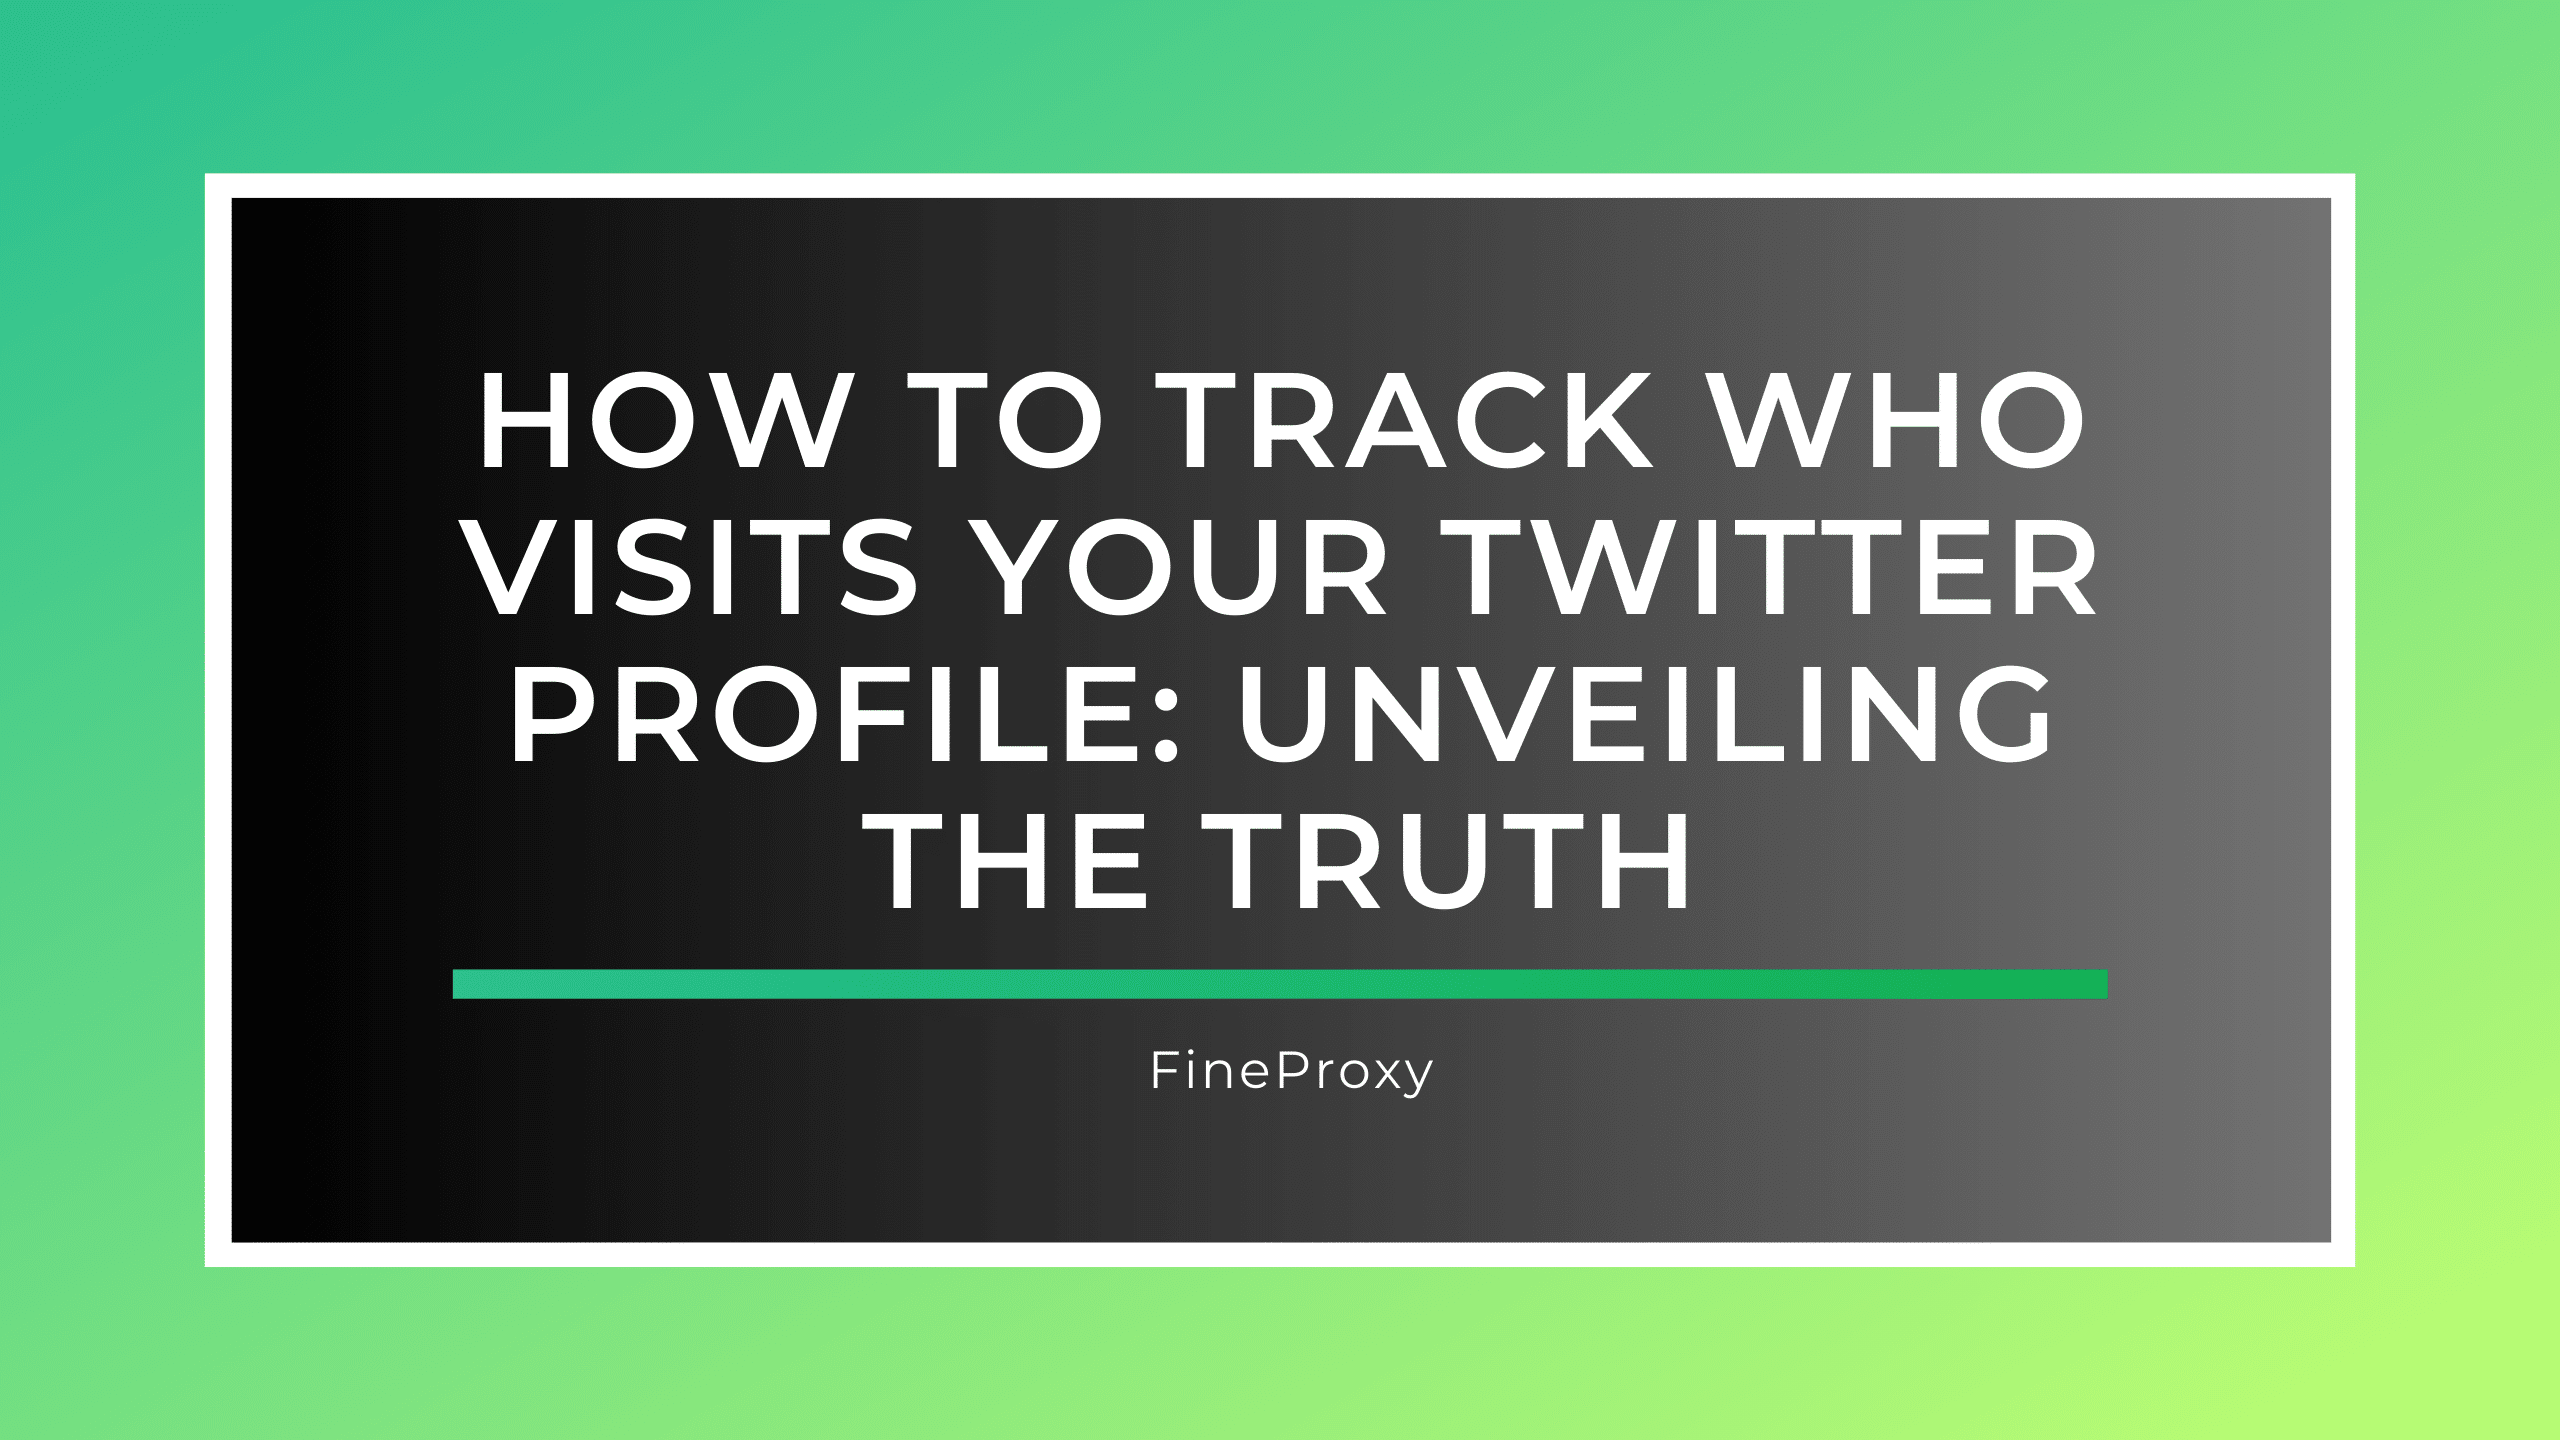 How to Track Who Visits Your Twitter Profile: Unveiling the Truth